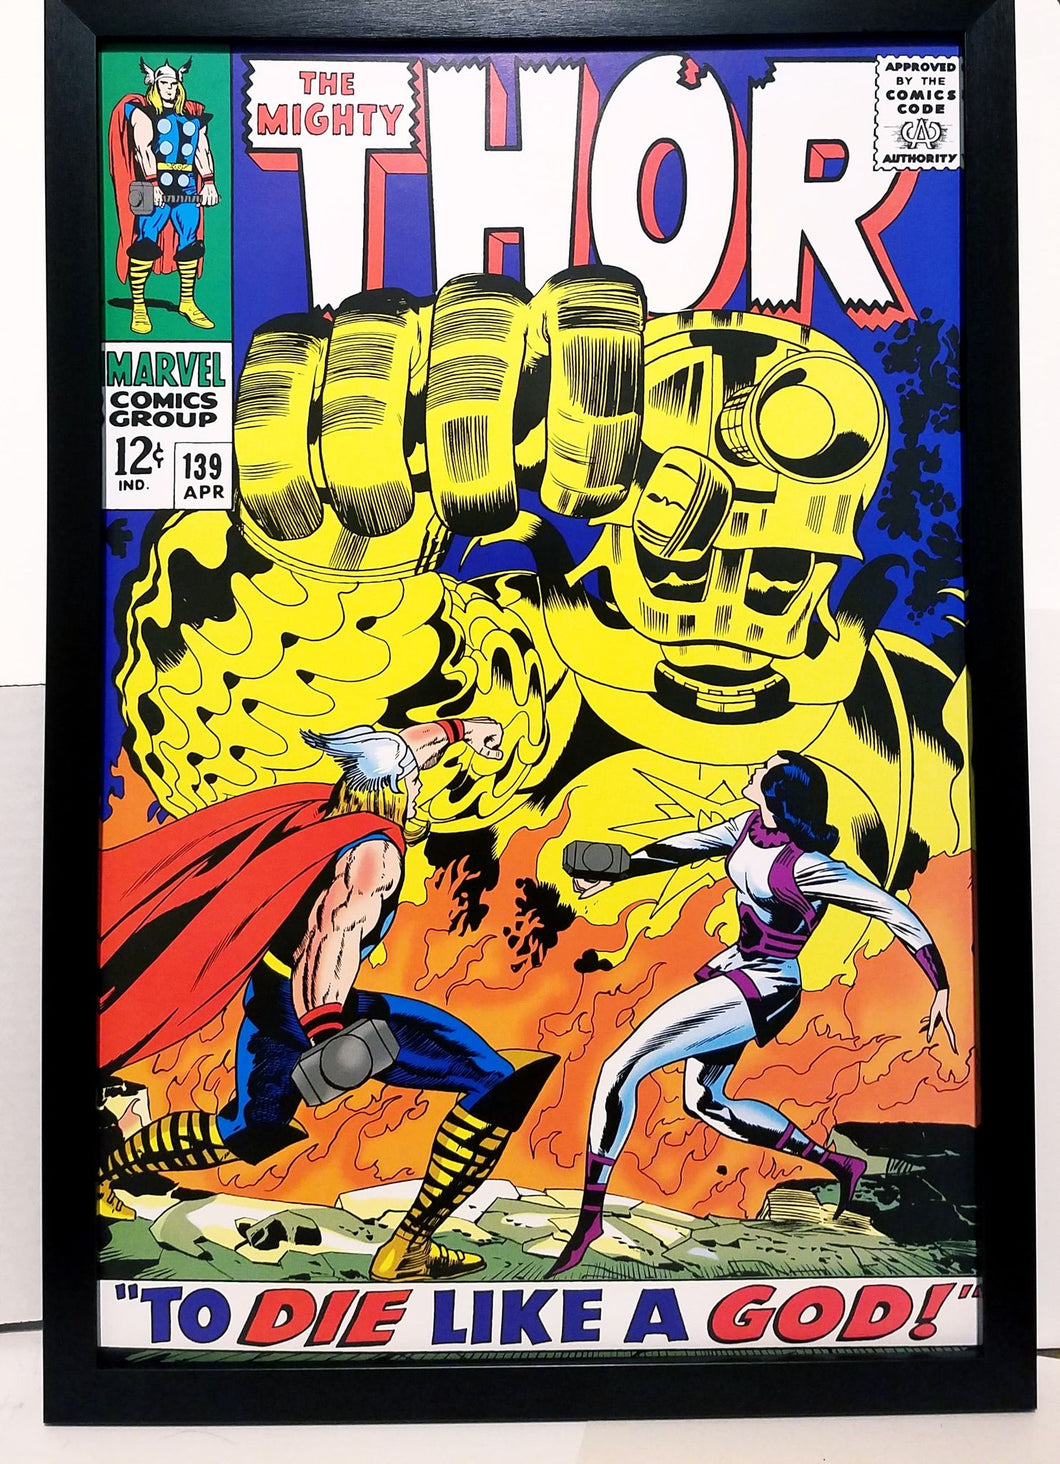 Mighty Thor #139 by Jack Kirby 12x18 FRAMED Marvel Comics Vintage Art Print Poster